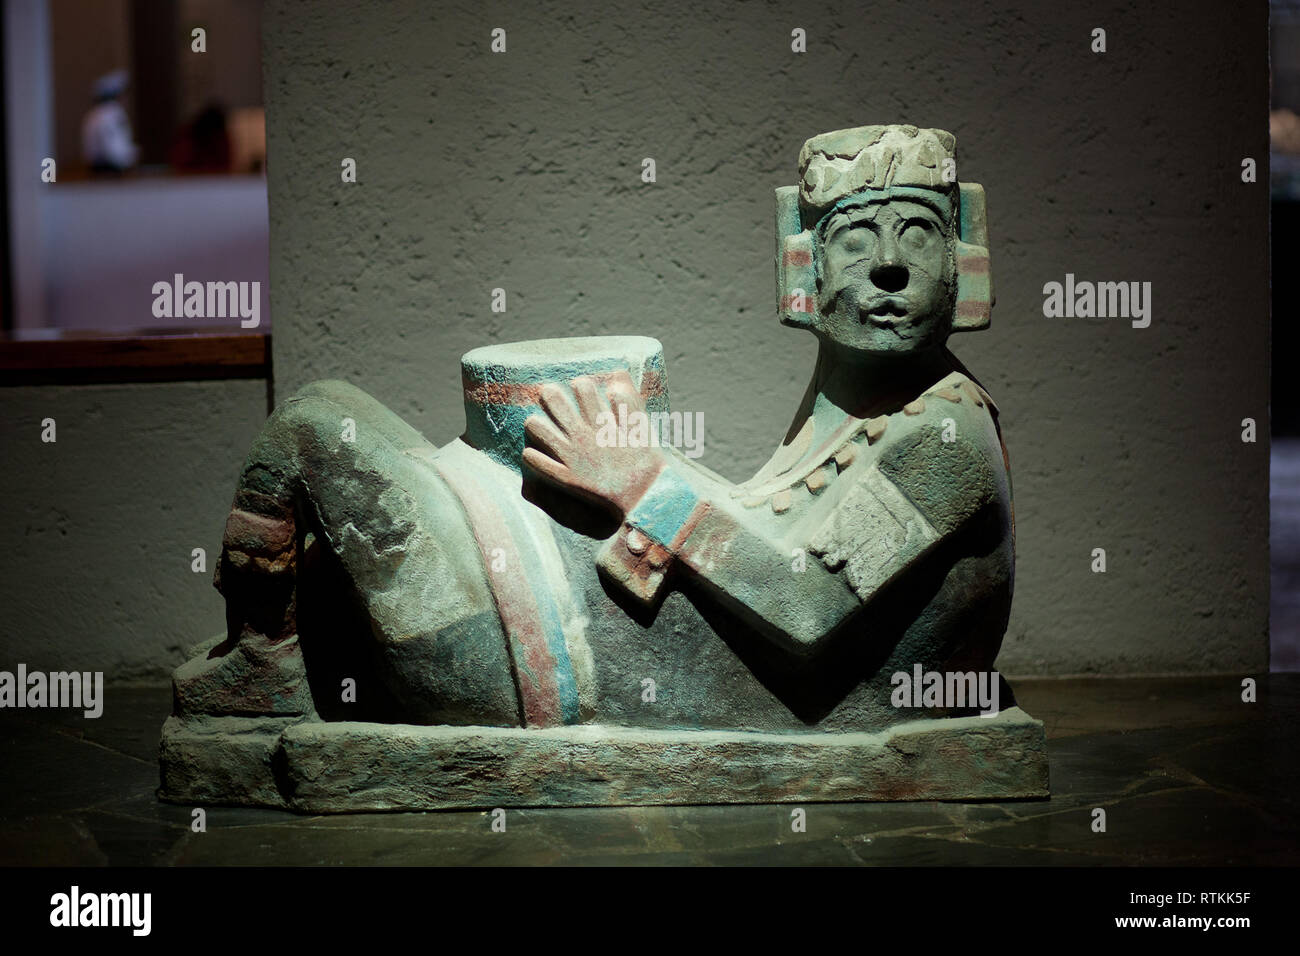 Stone sculpture of Aztec God Chac Mool from the city of Tenochtitlan. Mexico city, mexico Stock Photo